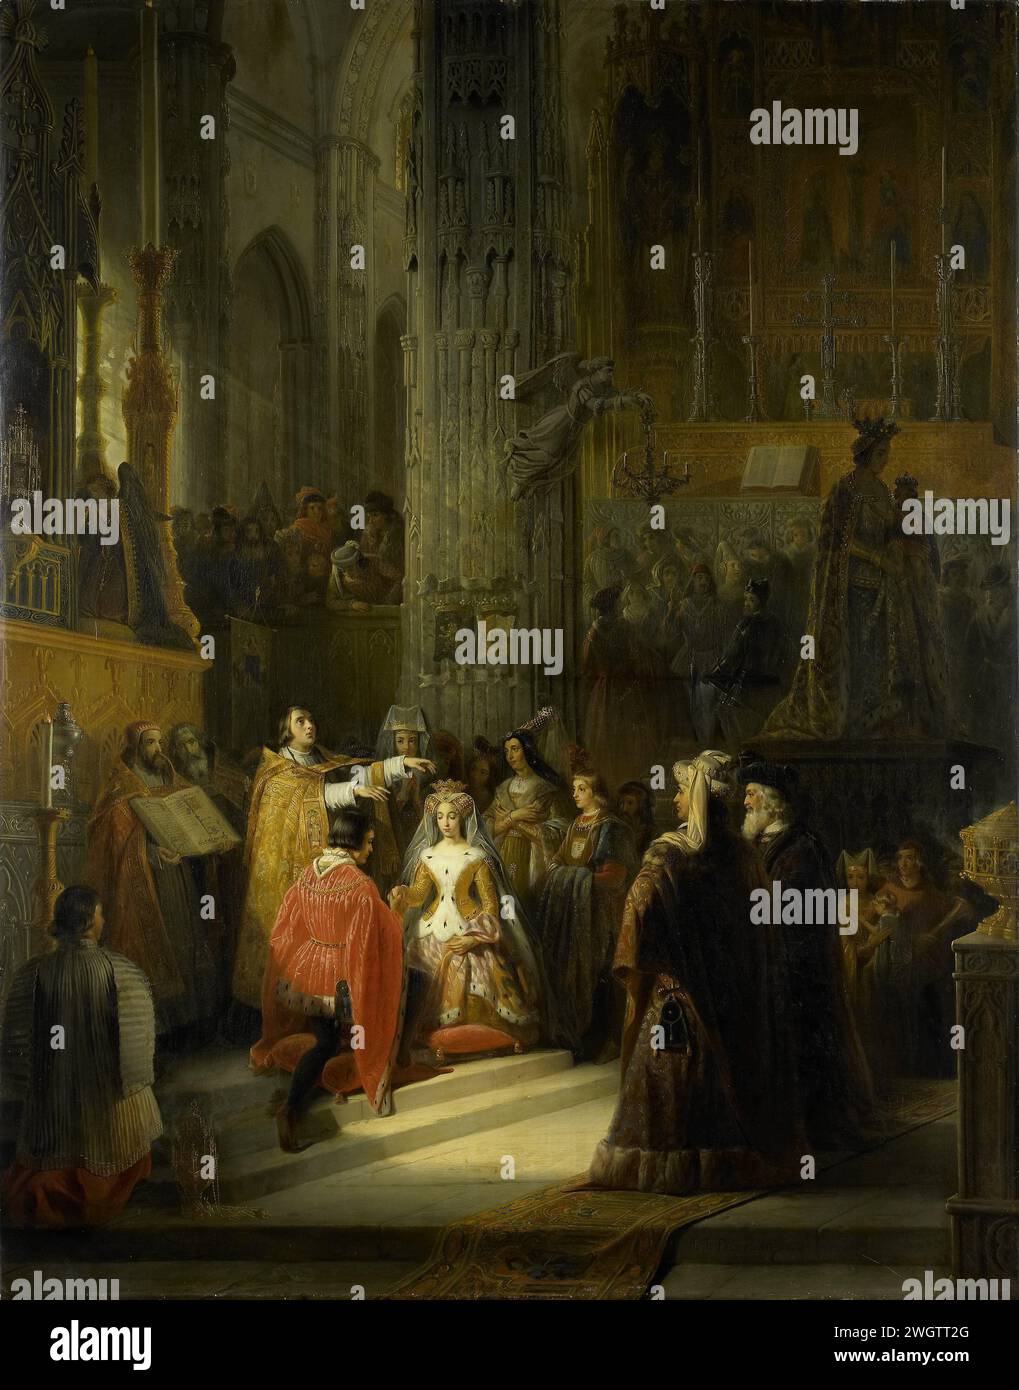 The Wedding of Jacoba of Bavaria, Countess of Holland, and Jan IV, Duke of Brabant, 10 March 1418, Jacob Joseph Eeckhout, 1839 painting The marriage of Jacoba van Beieren, Countess of Holland, and Jan IV, Duke van Brabant, closed on 10 March 1418 in the Hofkapel in The Hague. Church interior in which the couple, kneeling at the altar, is blessed by the priest. The collected attendees look, on the left the light flows through the church window inside.  canvas. oil paint (paint)  blessing the married couple Chapel Stock Photo